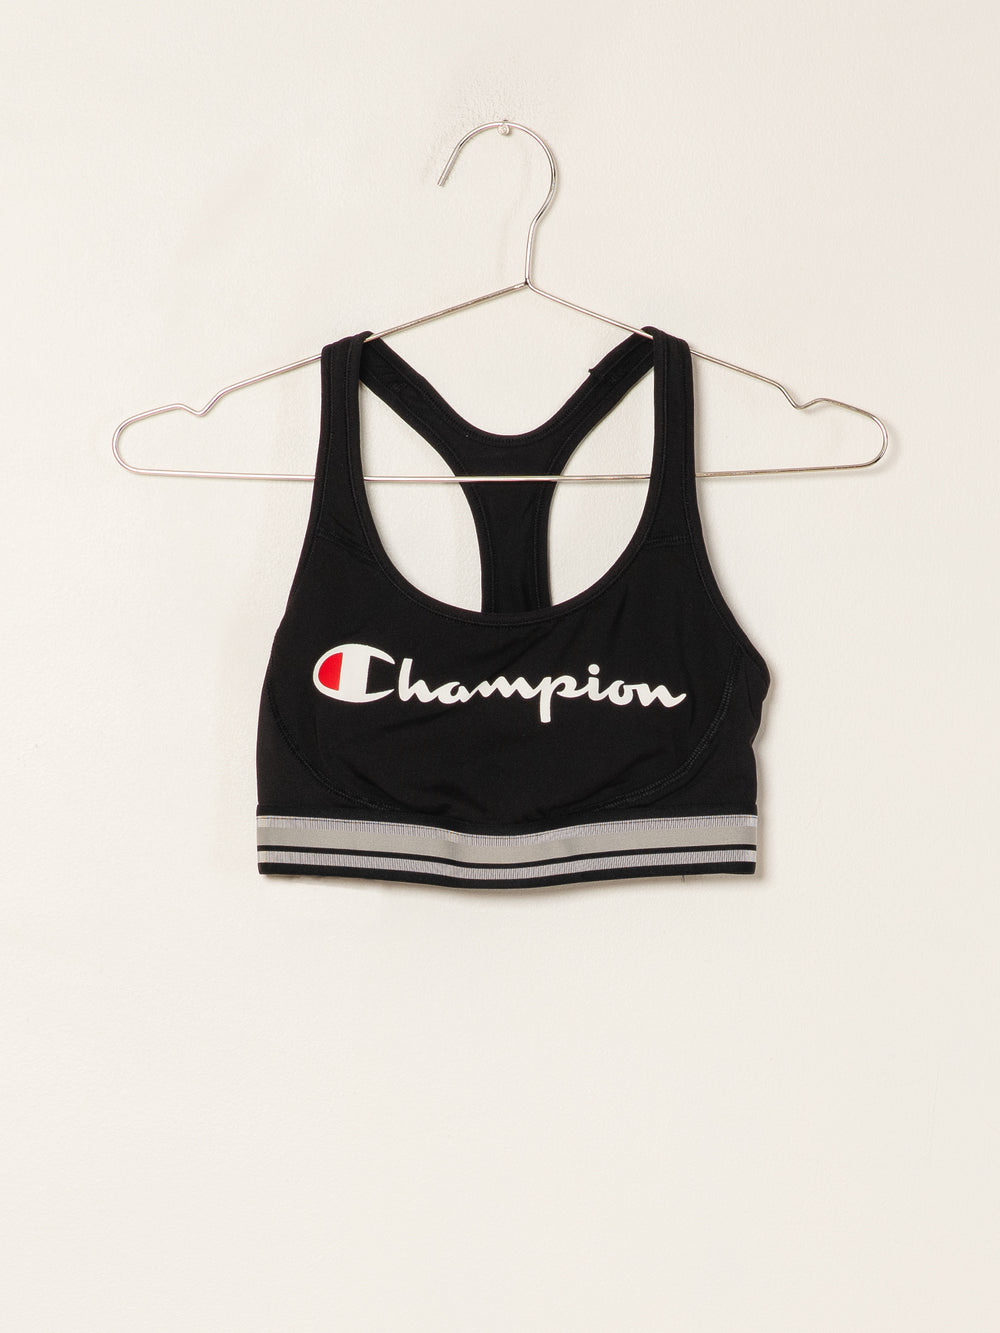 CHAMPION ABSOLUTE WORKOUT BRA  - CLEARANCE